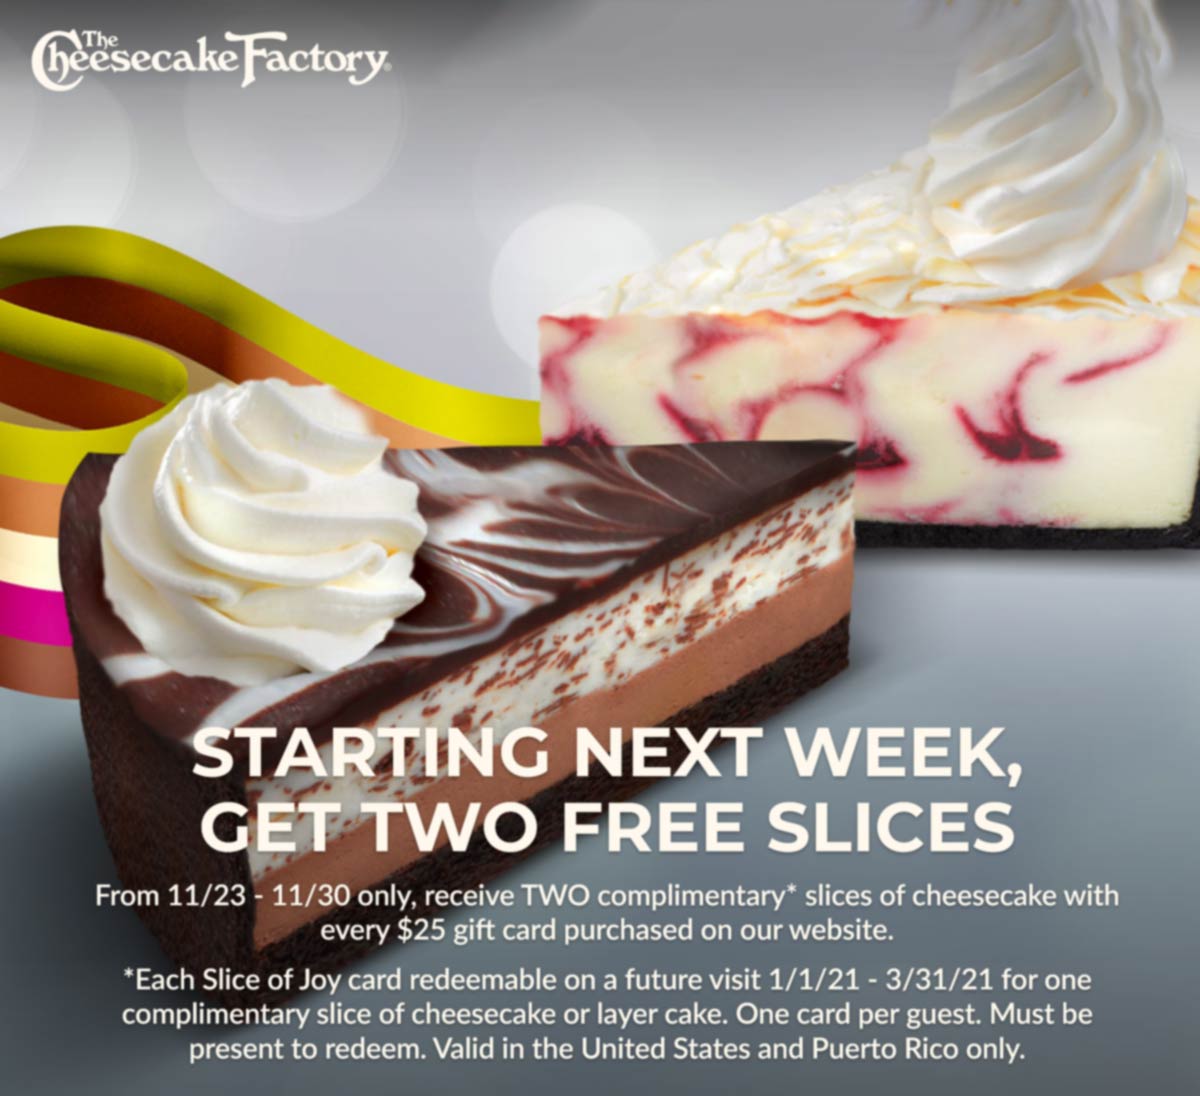 The Cheesecake Factory restaurants Coupon  2 free slices with every $25 gift card bought at The Cheesecake Factory #thecheesecakefactory 